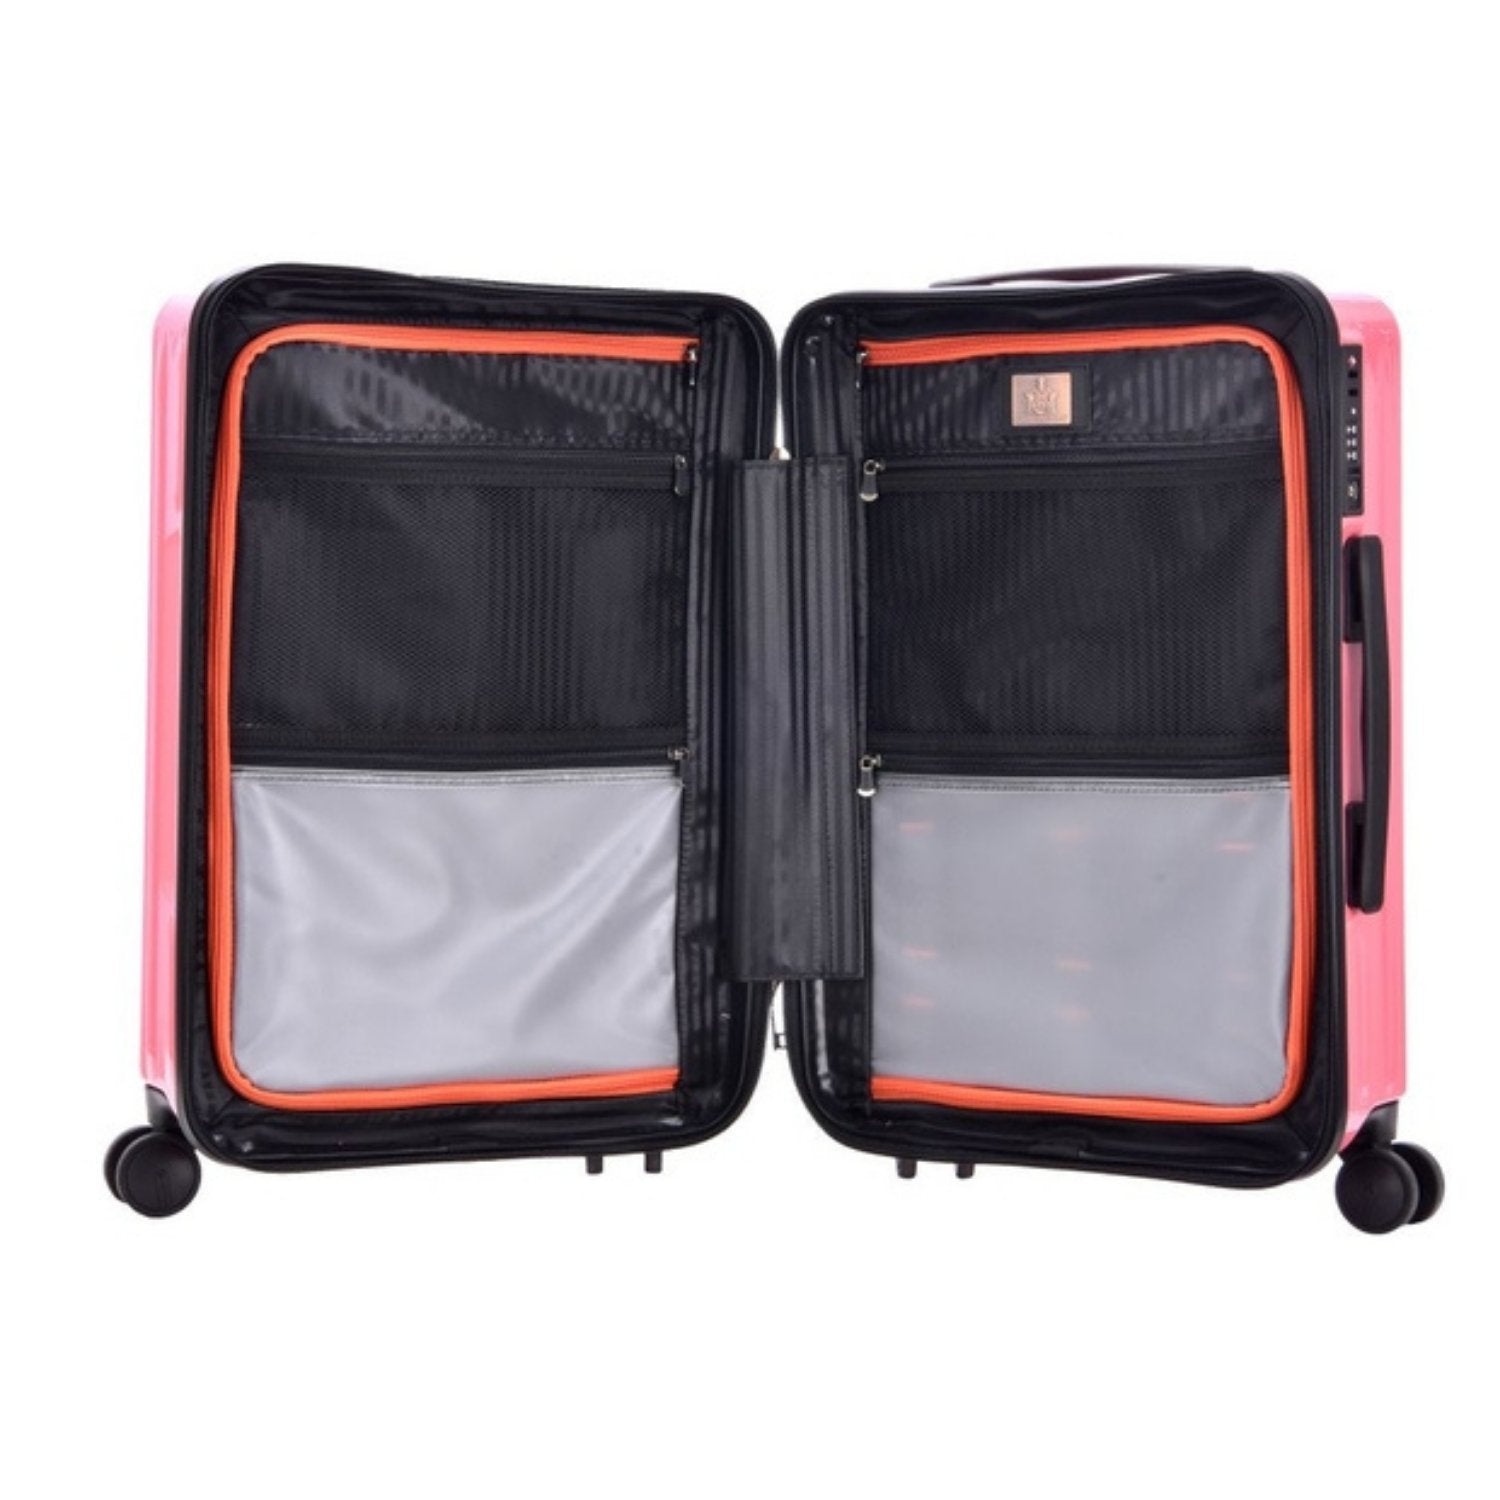 Lushberry Axel Collection Dove Pink Cabin - MOON - Luggage - Lushberry - Lushberry Axel Collection Dove Pink Cabin - Luggage - 7